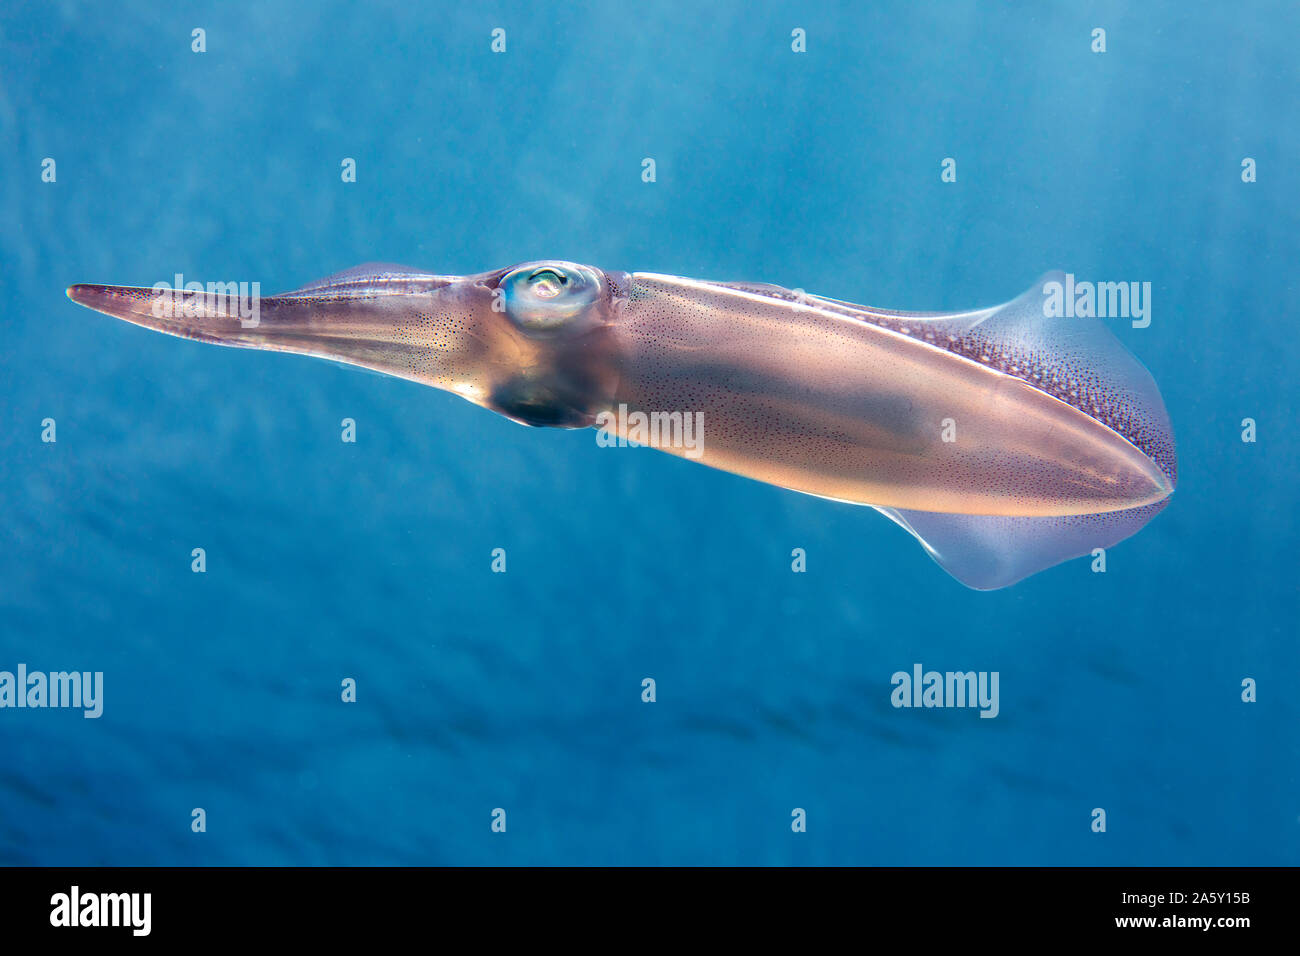 The oval squid, Sepioteuthis lessoniana, can reach 14 inches in length.  Photographed off the island of Yap, Micronesia. Stock Photo